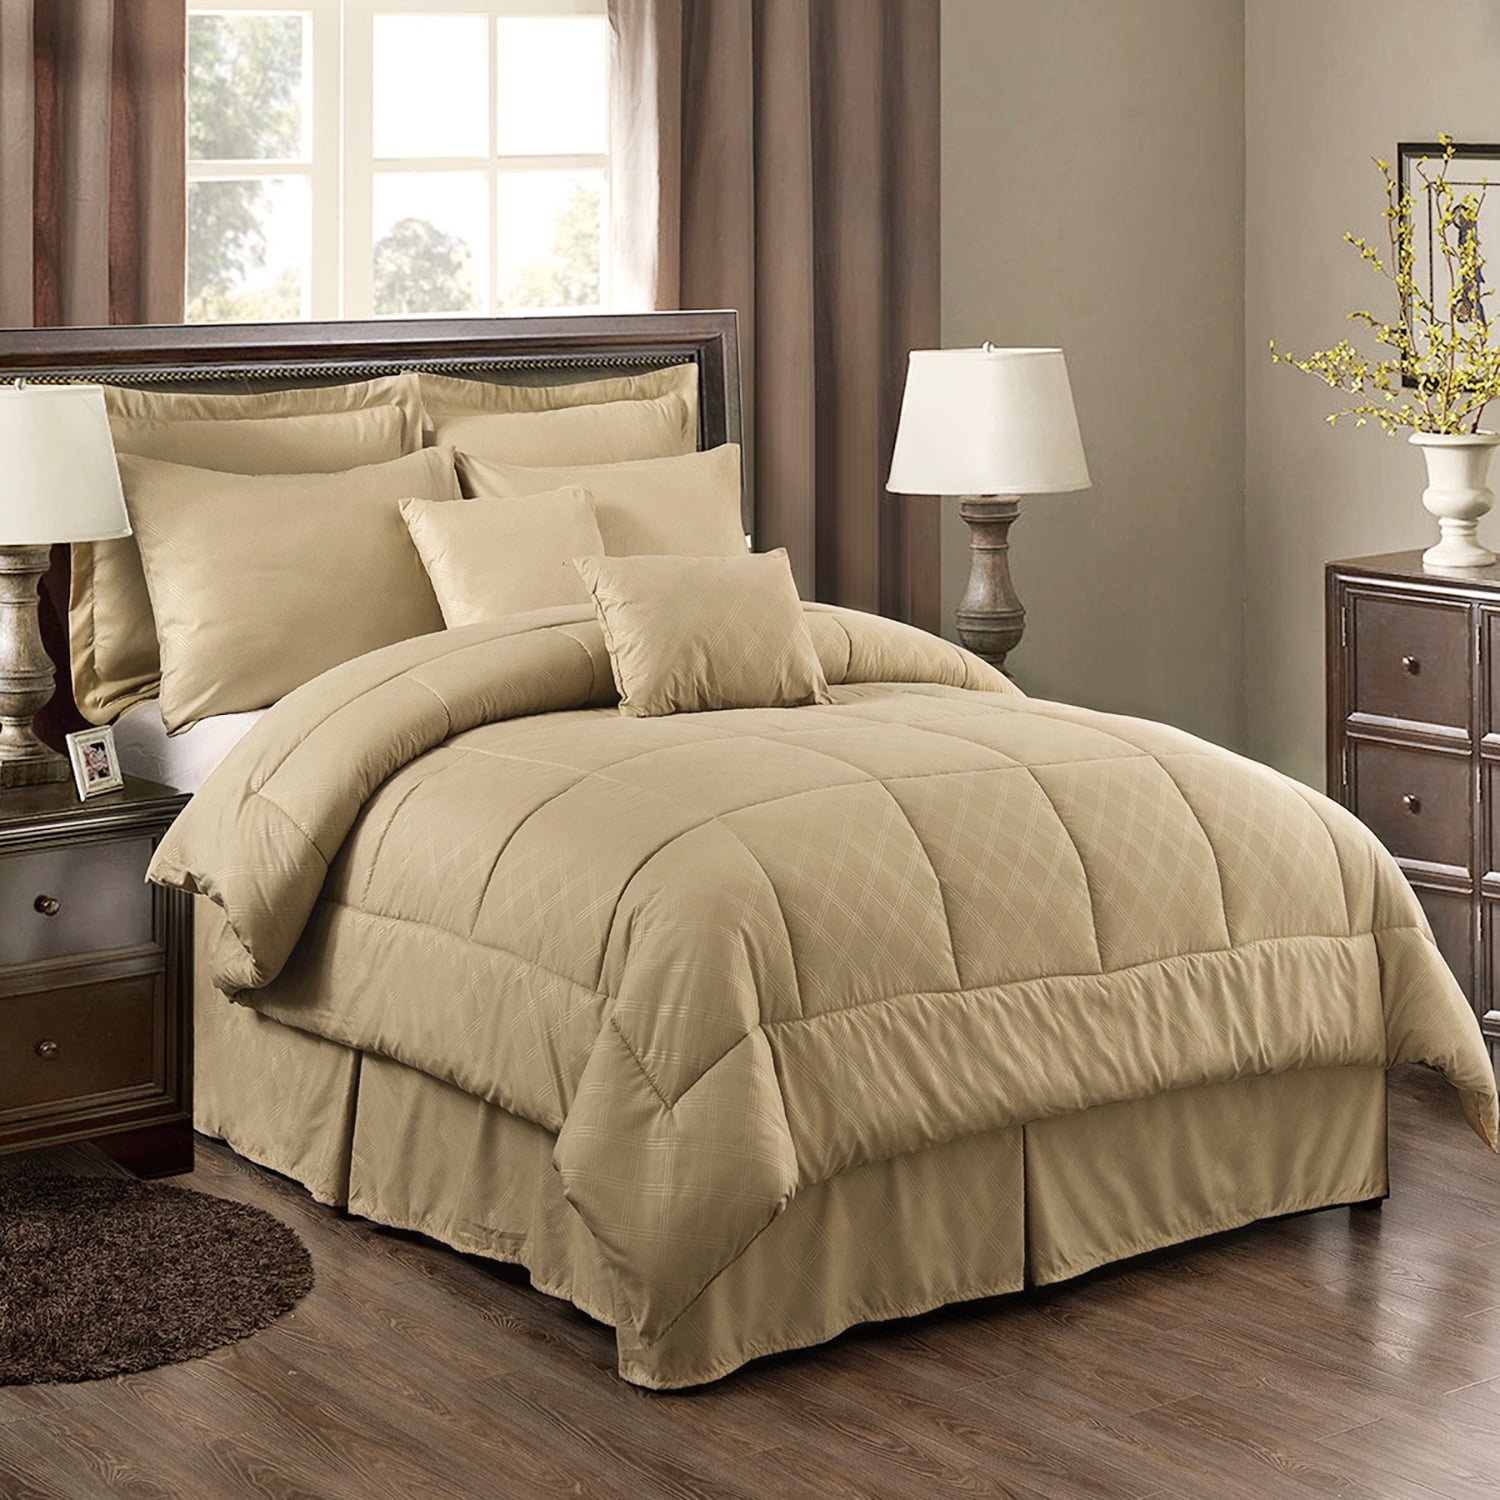 Beautiful Taupe Brown Soft Diamond Quilted Comforter 5 pcs Cal King Queen Set 